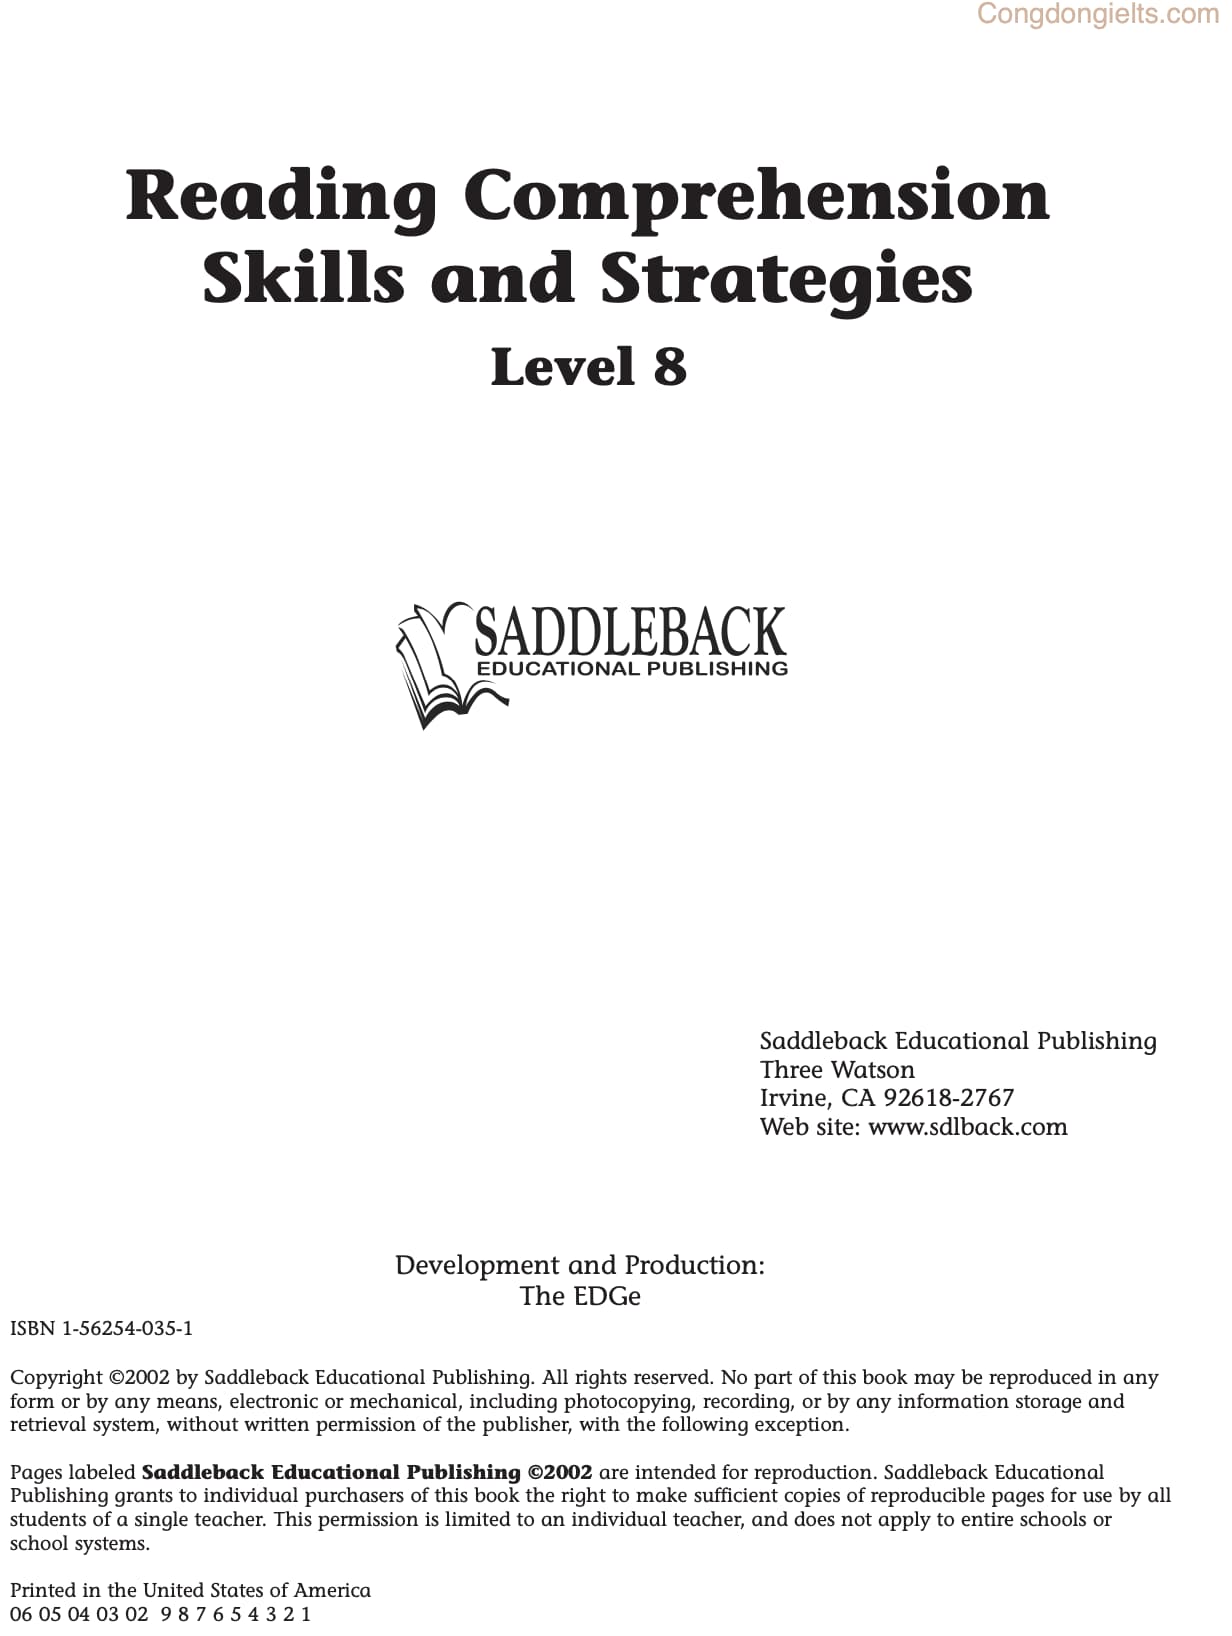 Download Reading Comprehension Skills and strategies level 8 PDF Full